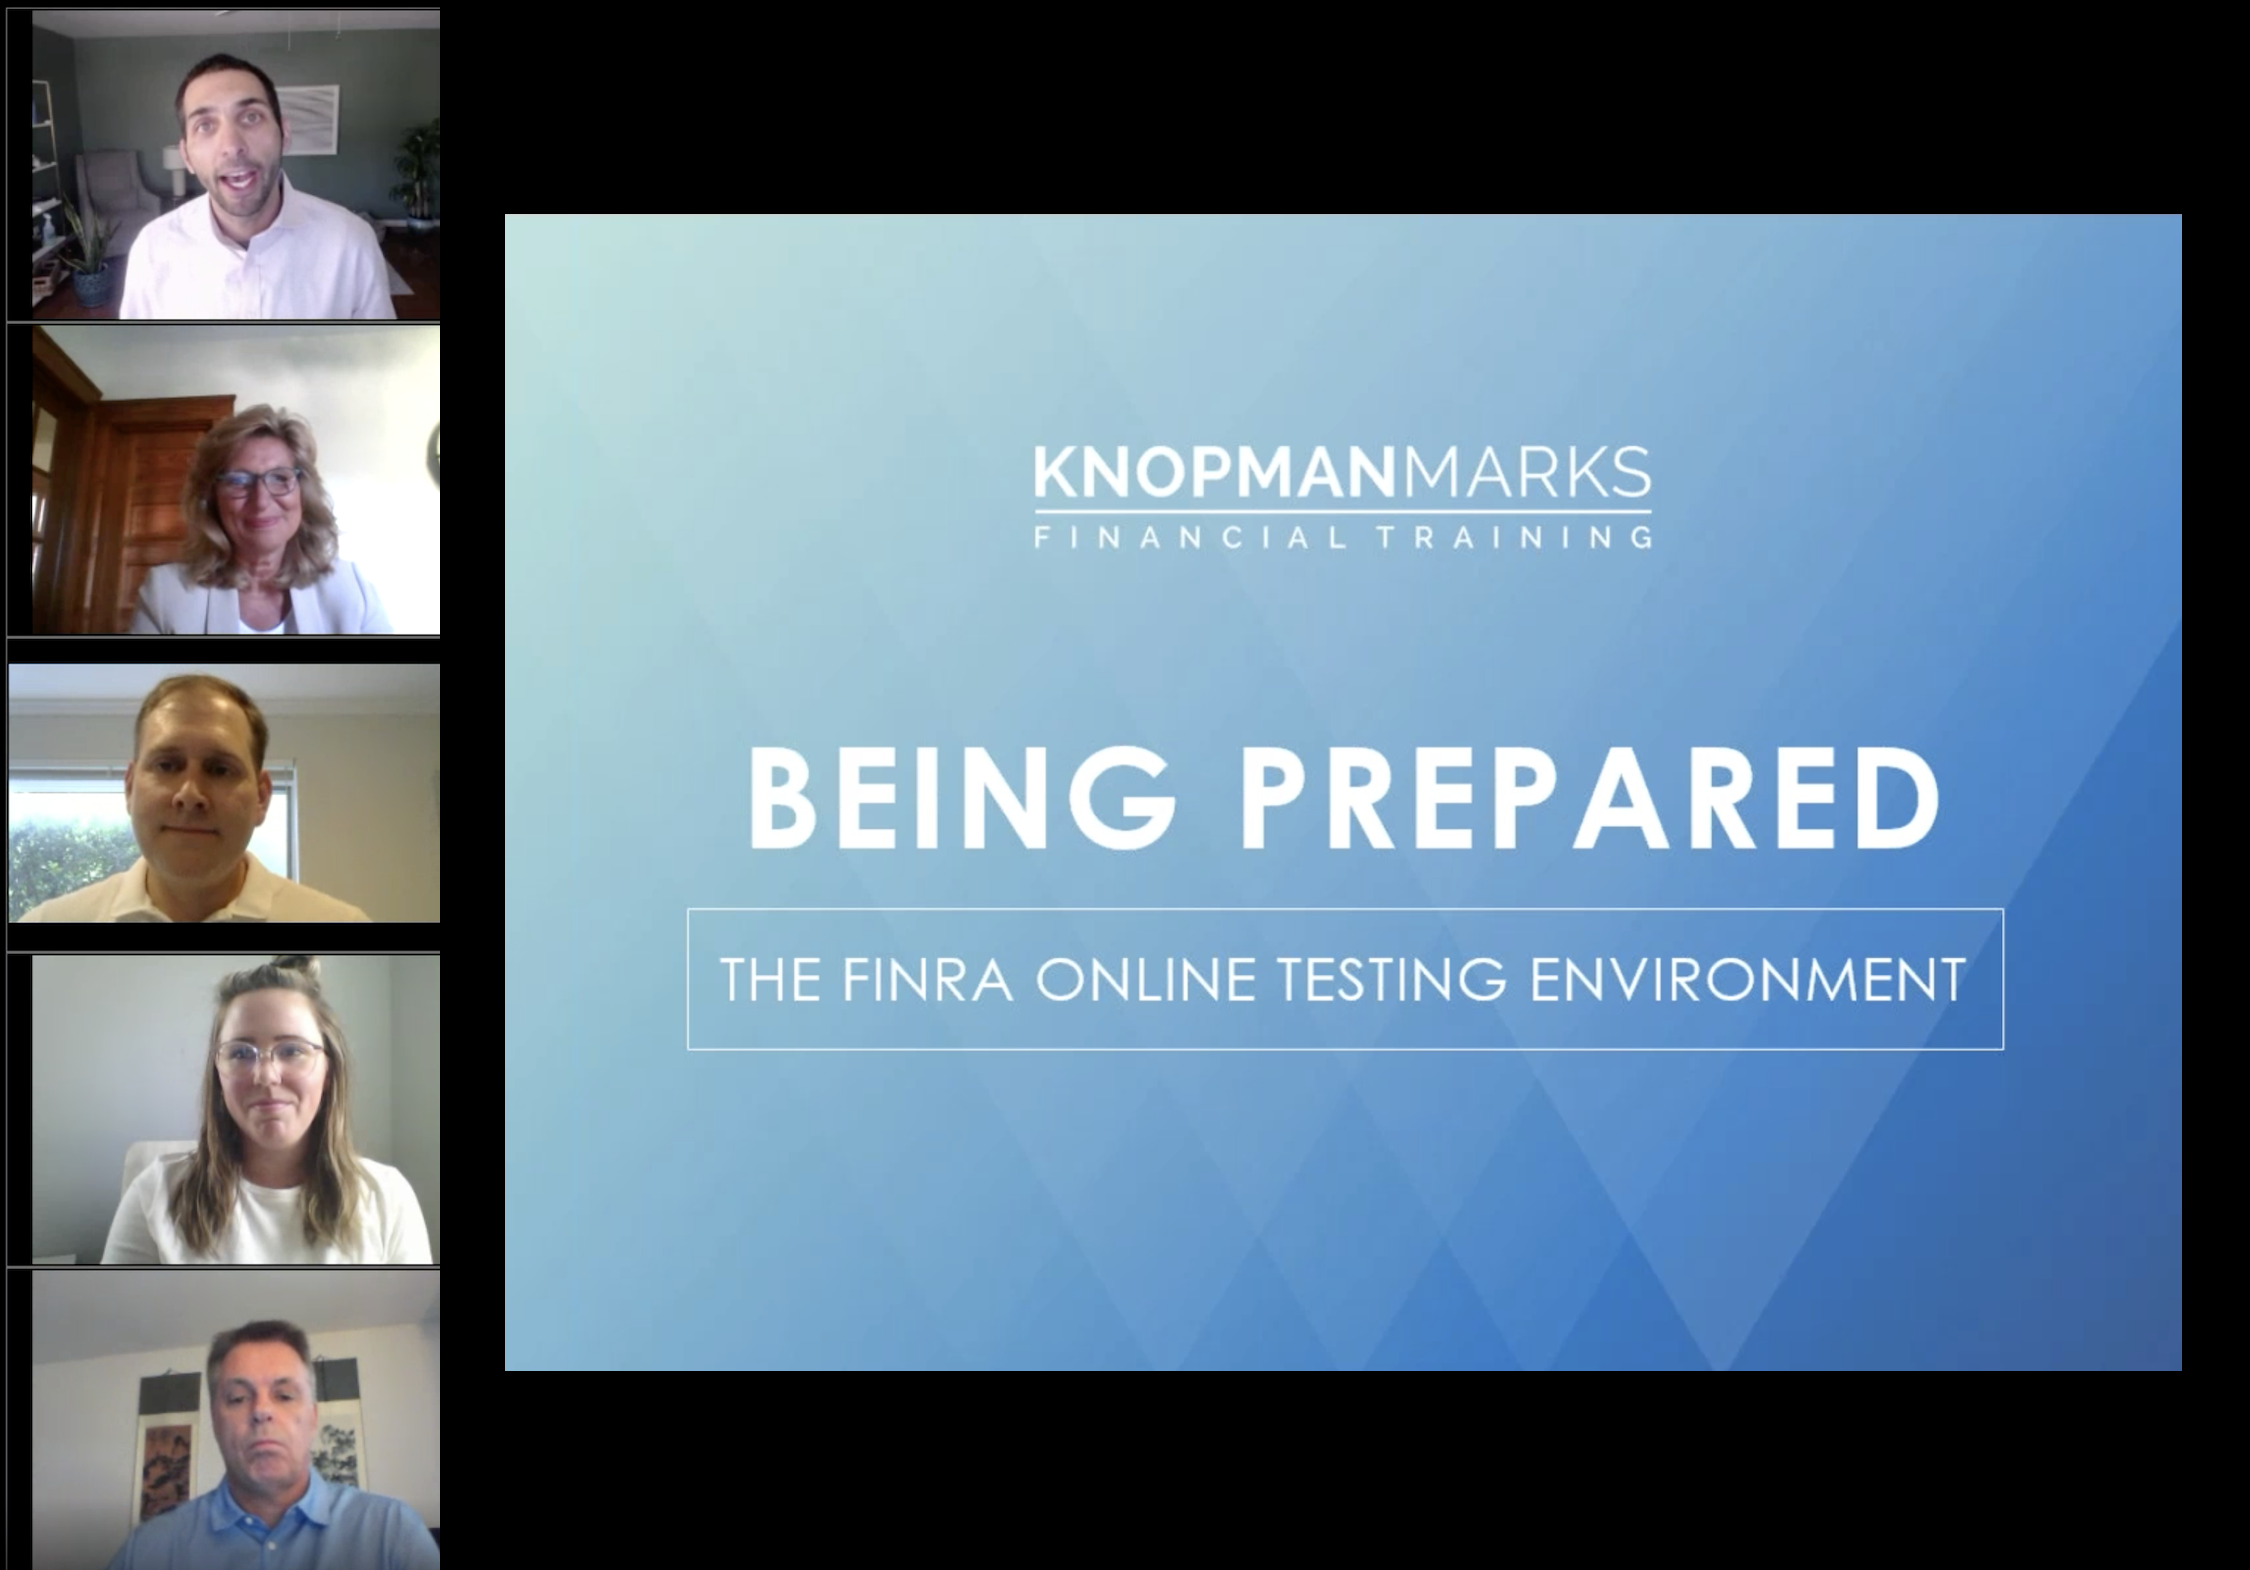 Everything You Need to Know About FINRA’s Online Testing